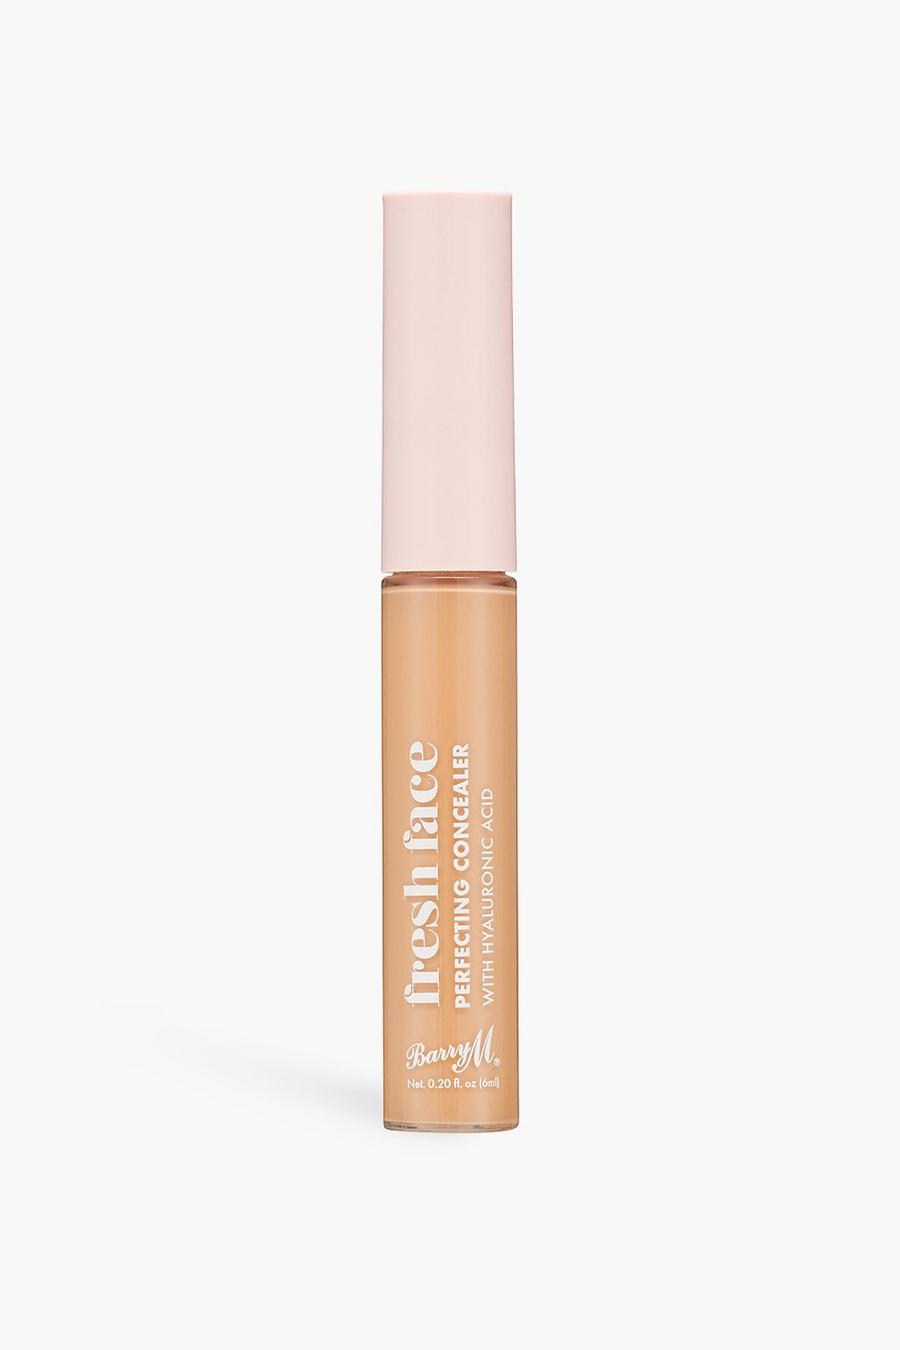 Barry M - Correttore Fresh Face Perfecting Concealer 7, Tan marrone